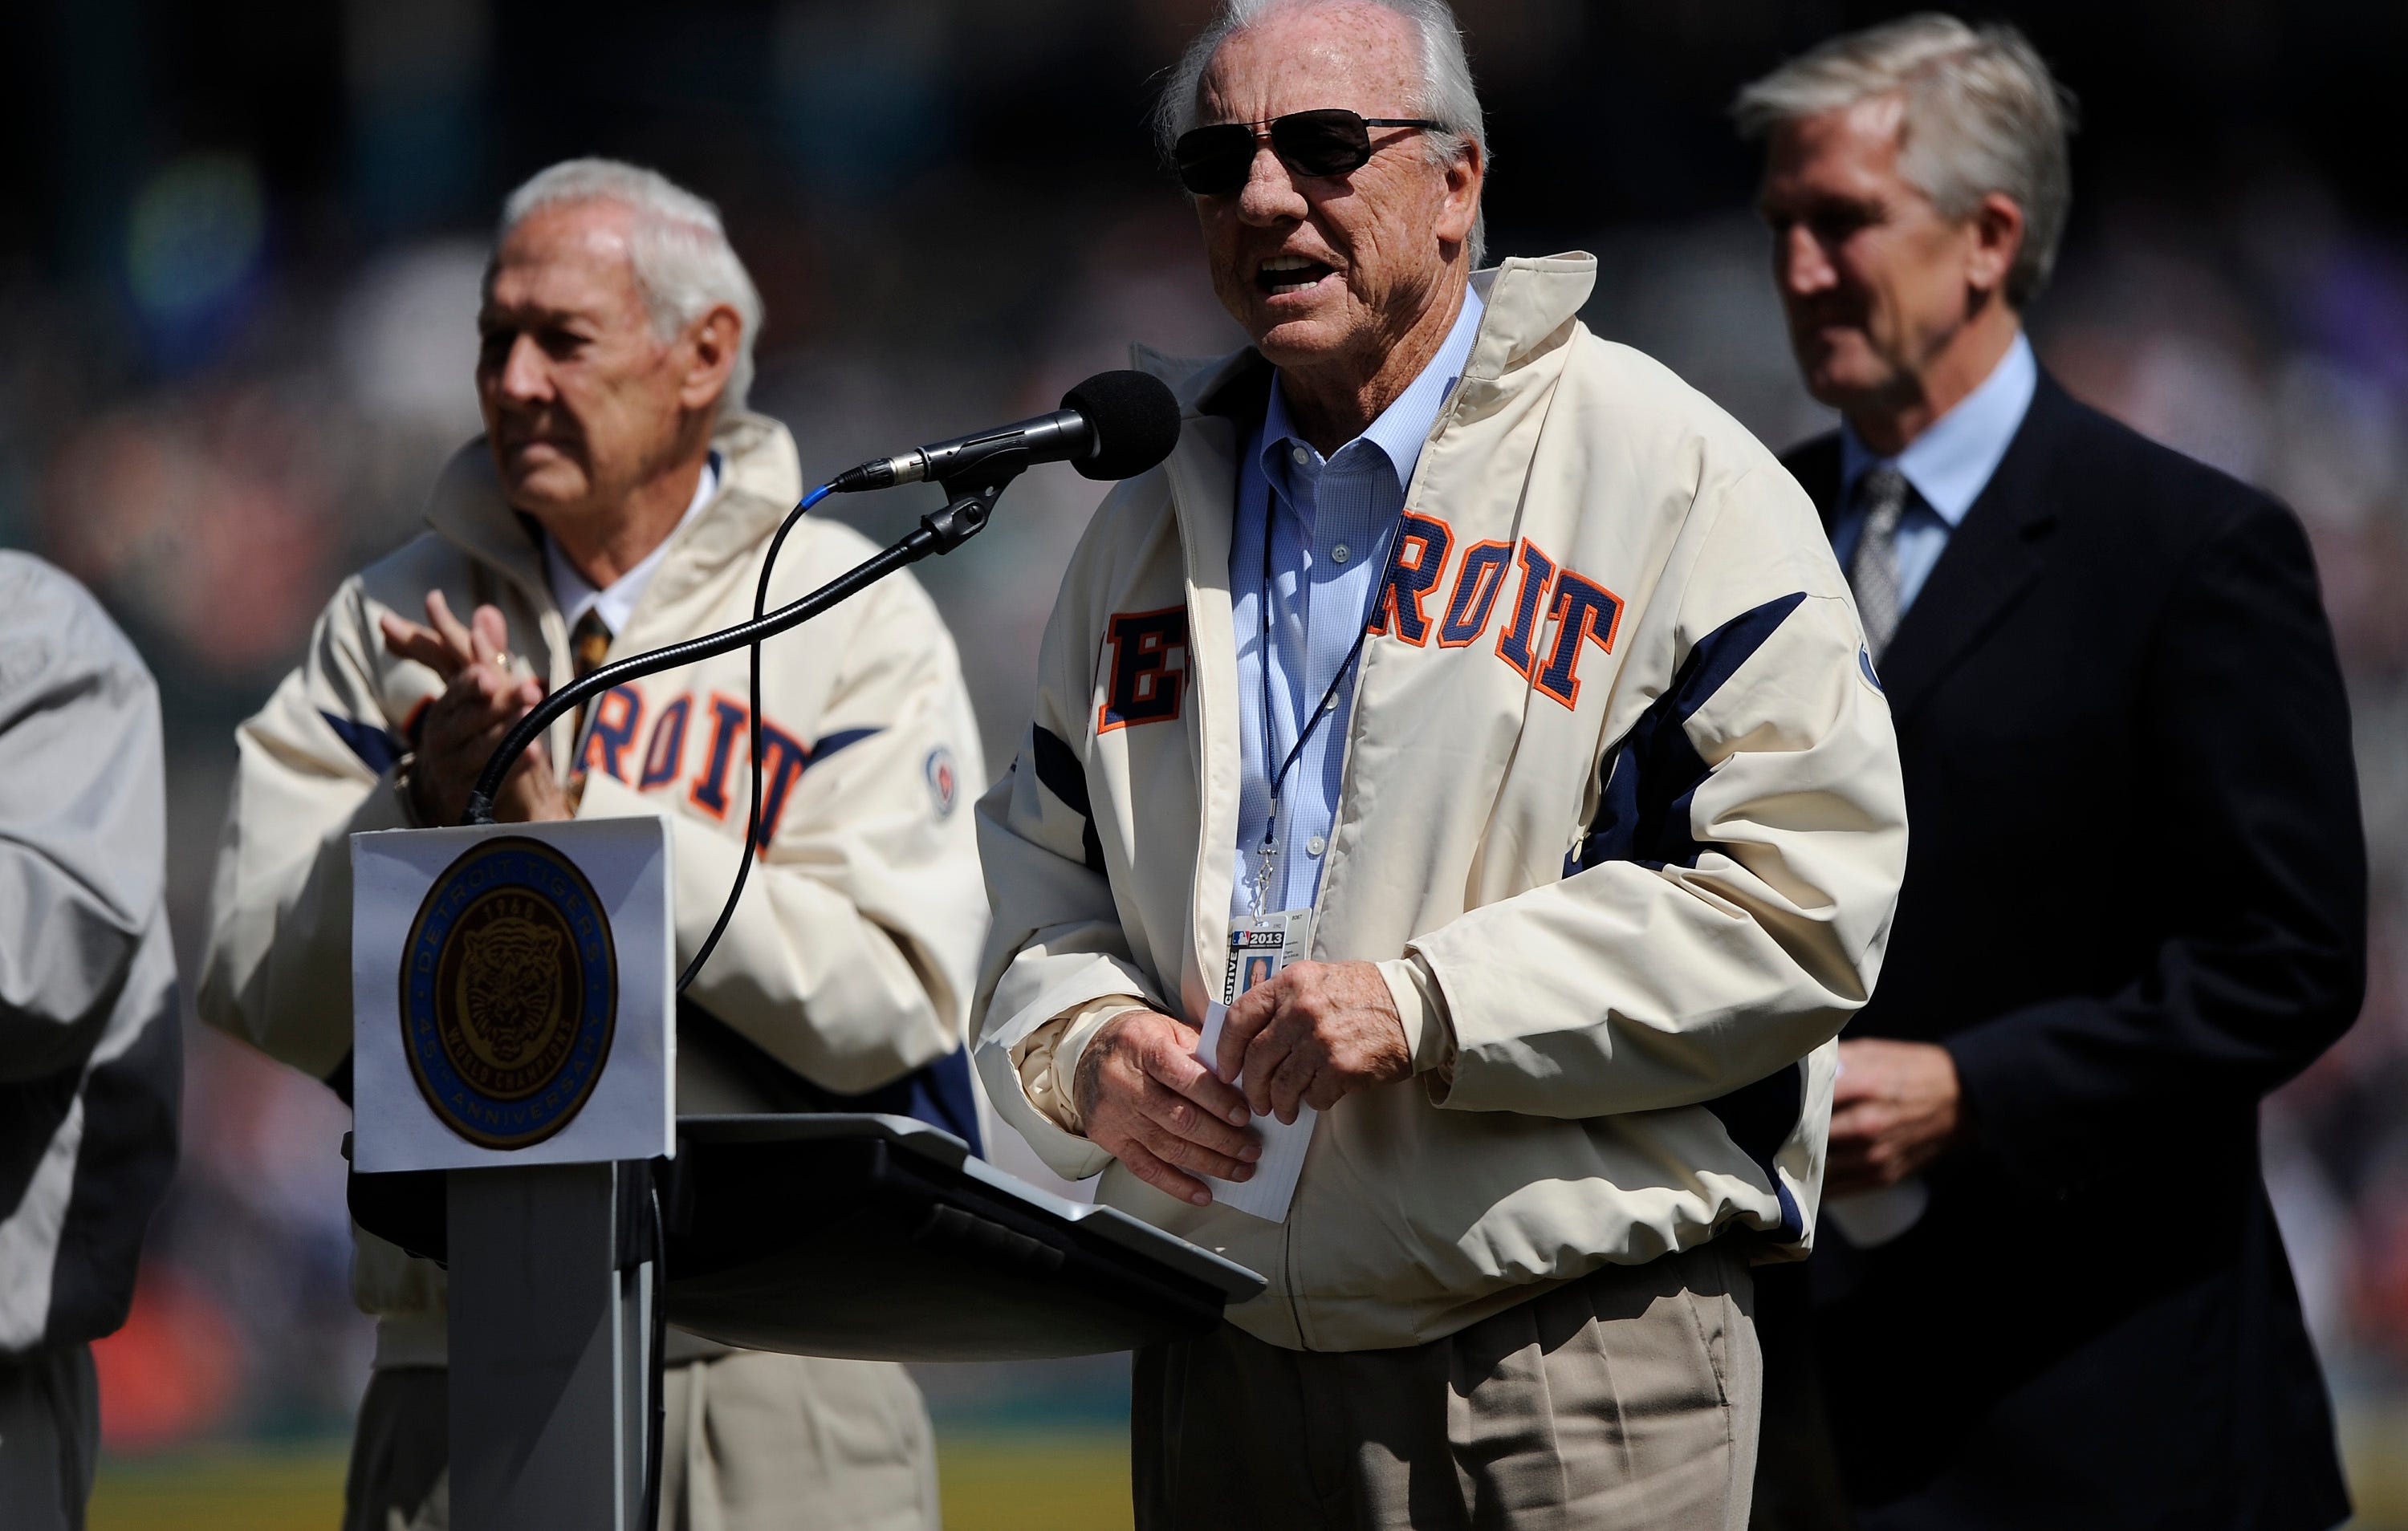 Former Detroit Tiger and 1968 team member Al Kaline talks during the ceremony recognizing the team's accomplishments before a game against the Twins on Saturday, May 25, 2013.